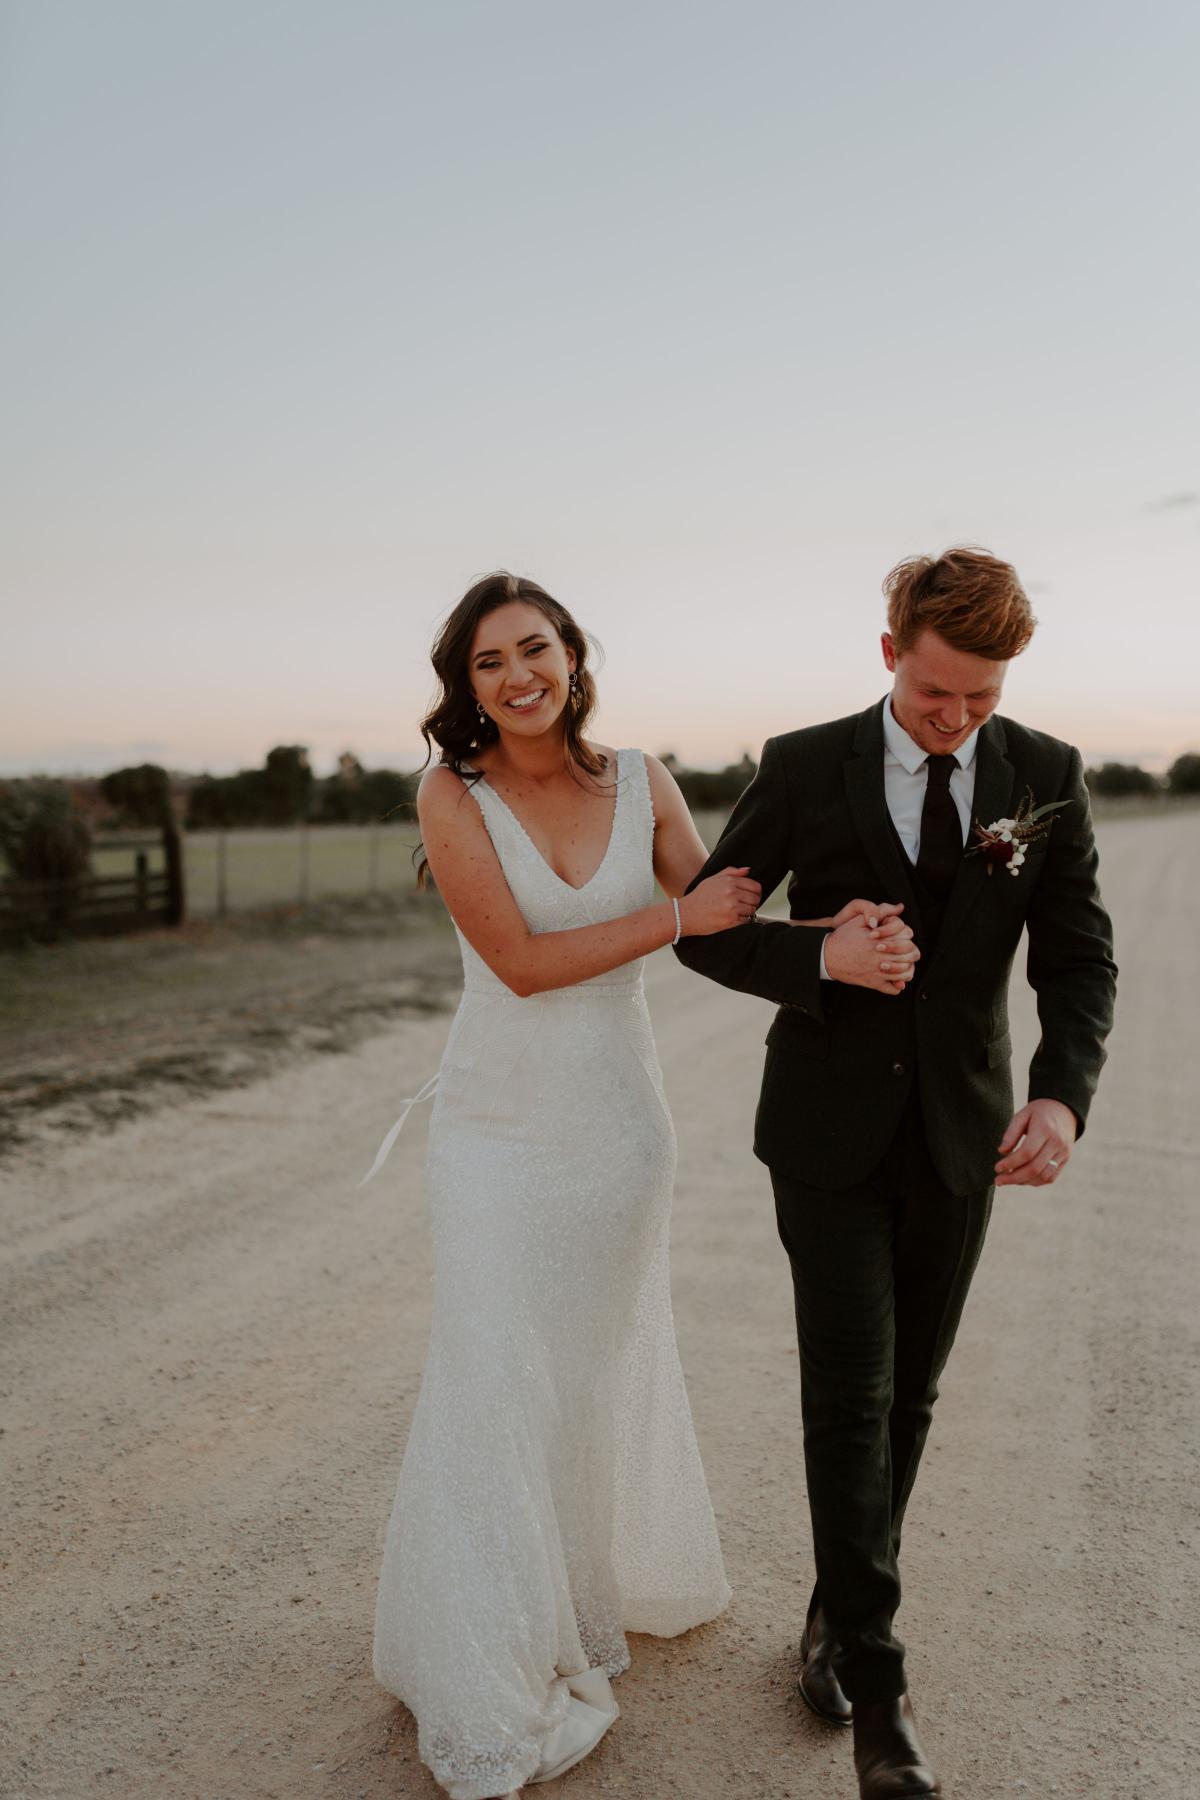 KWH real bride Amber walks with new husband Stewart while wearing the beaded Olympia gown with v-neck.